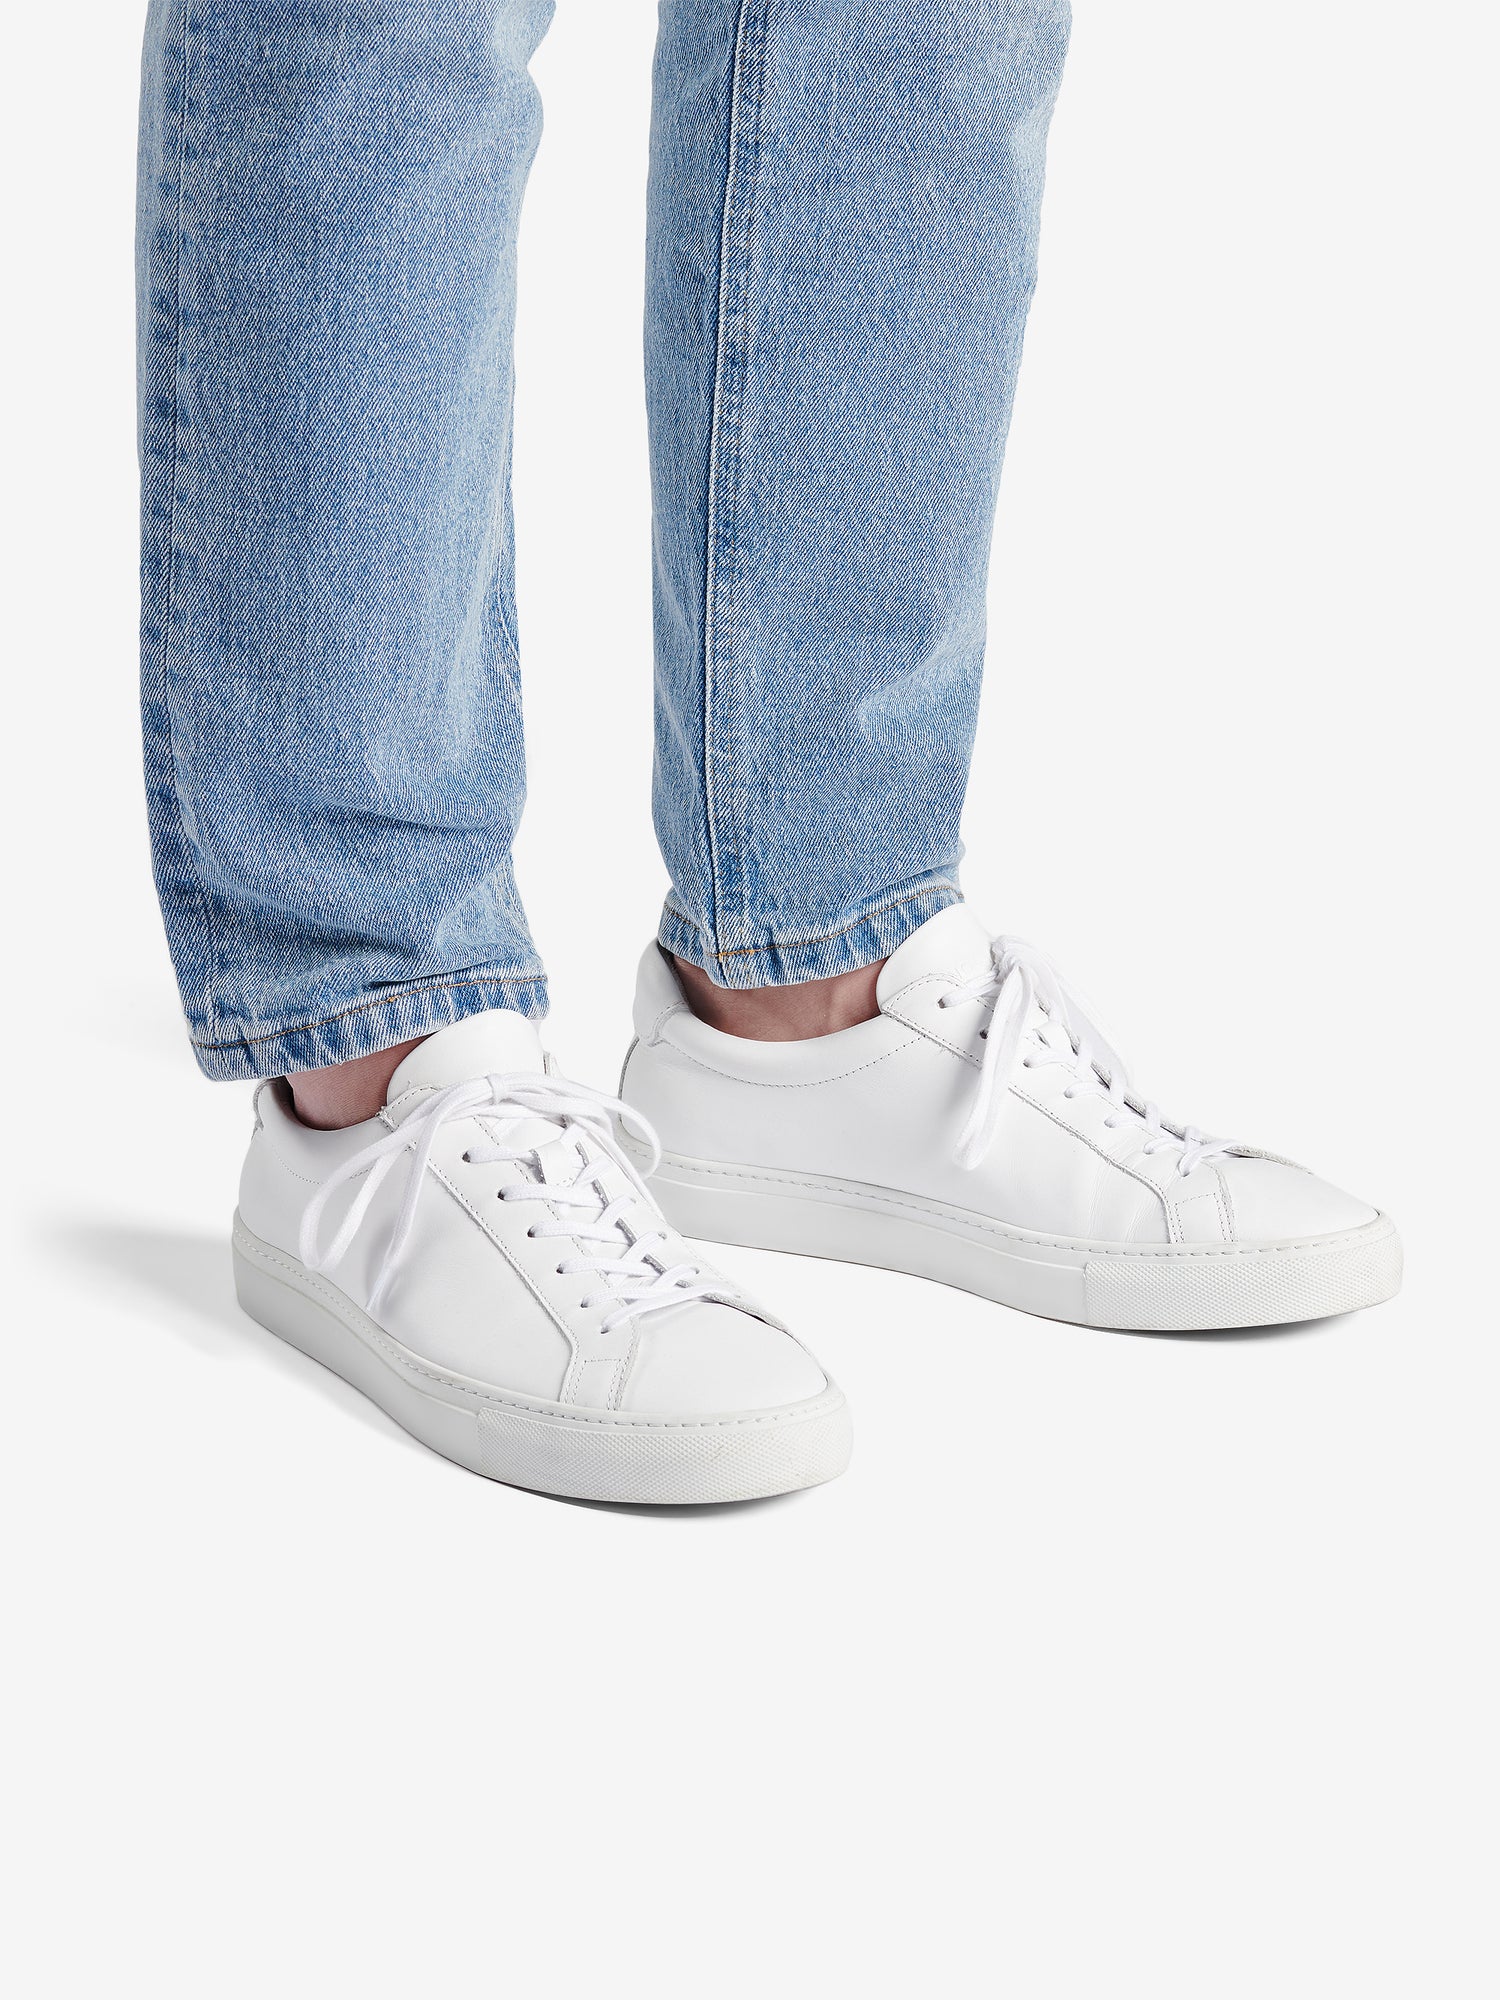 Dundee Leather FW90070-WHT